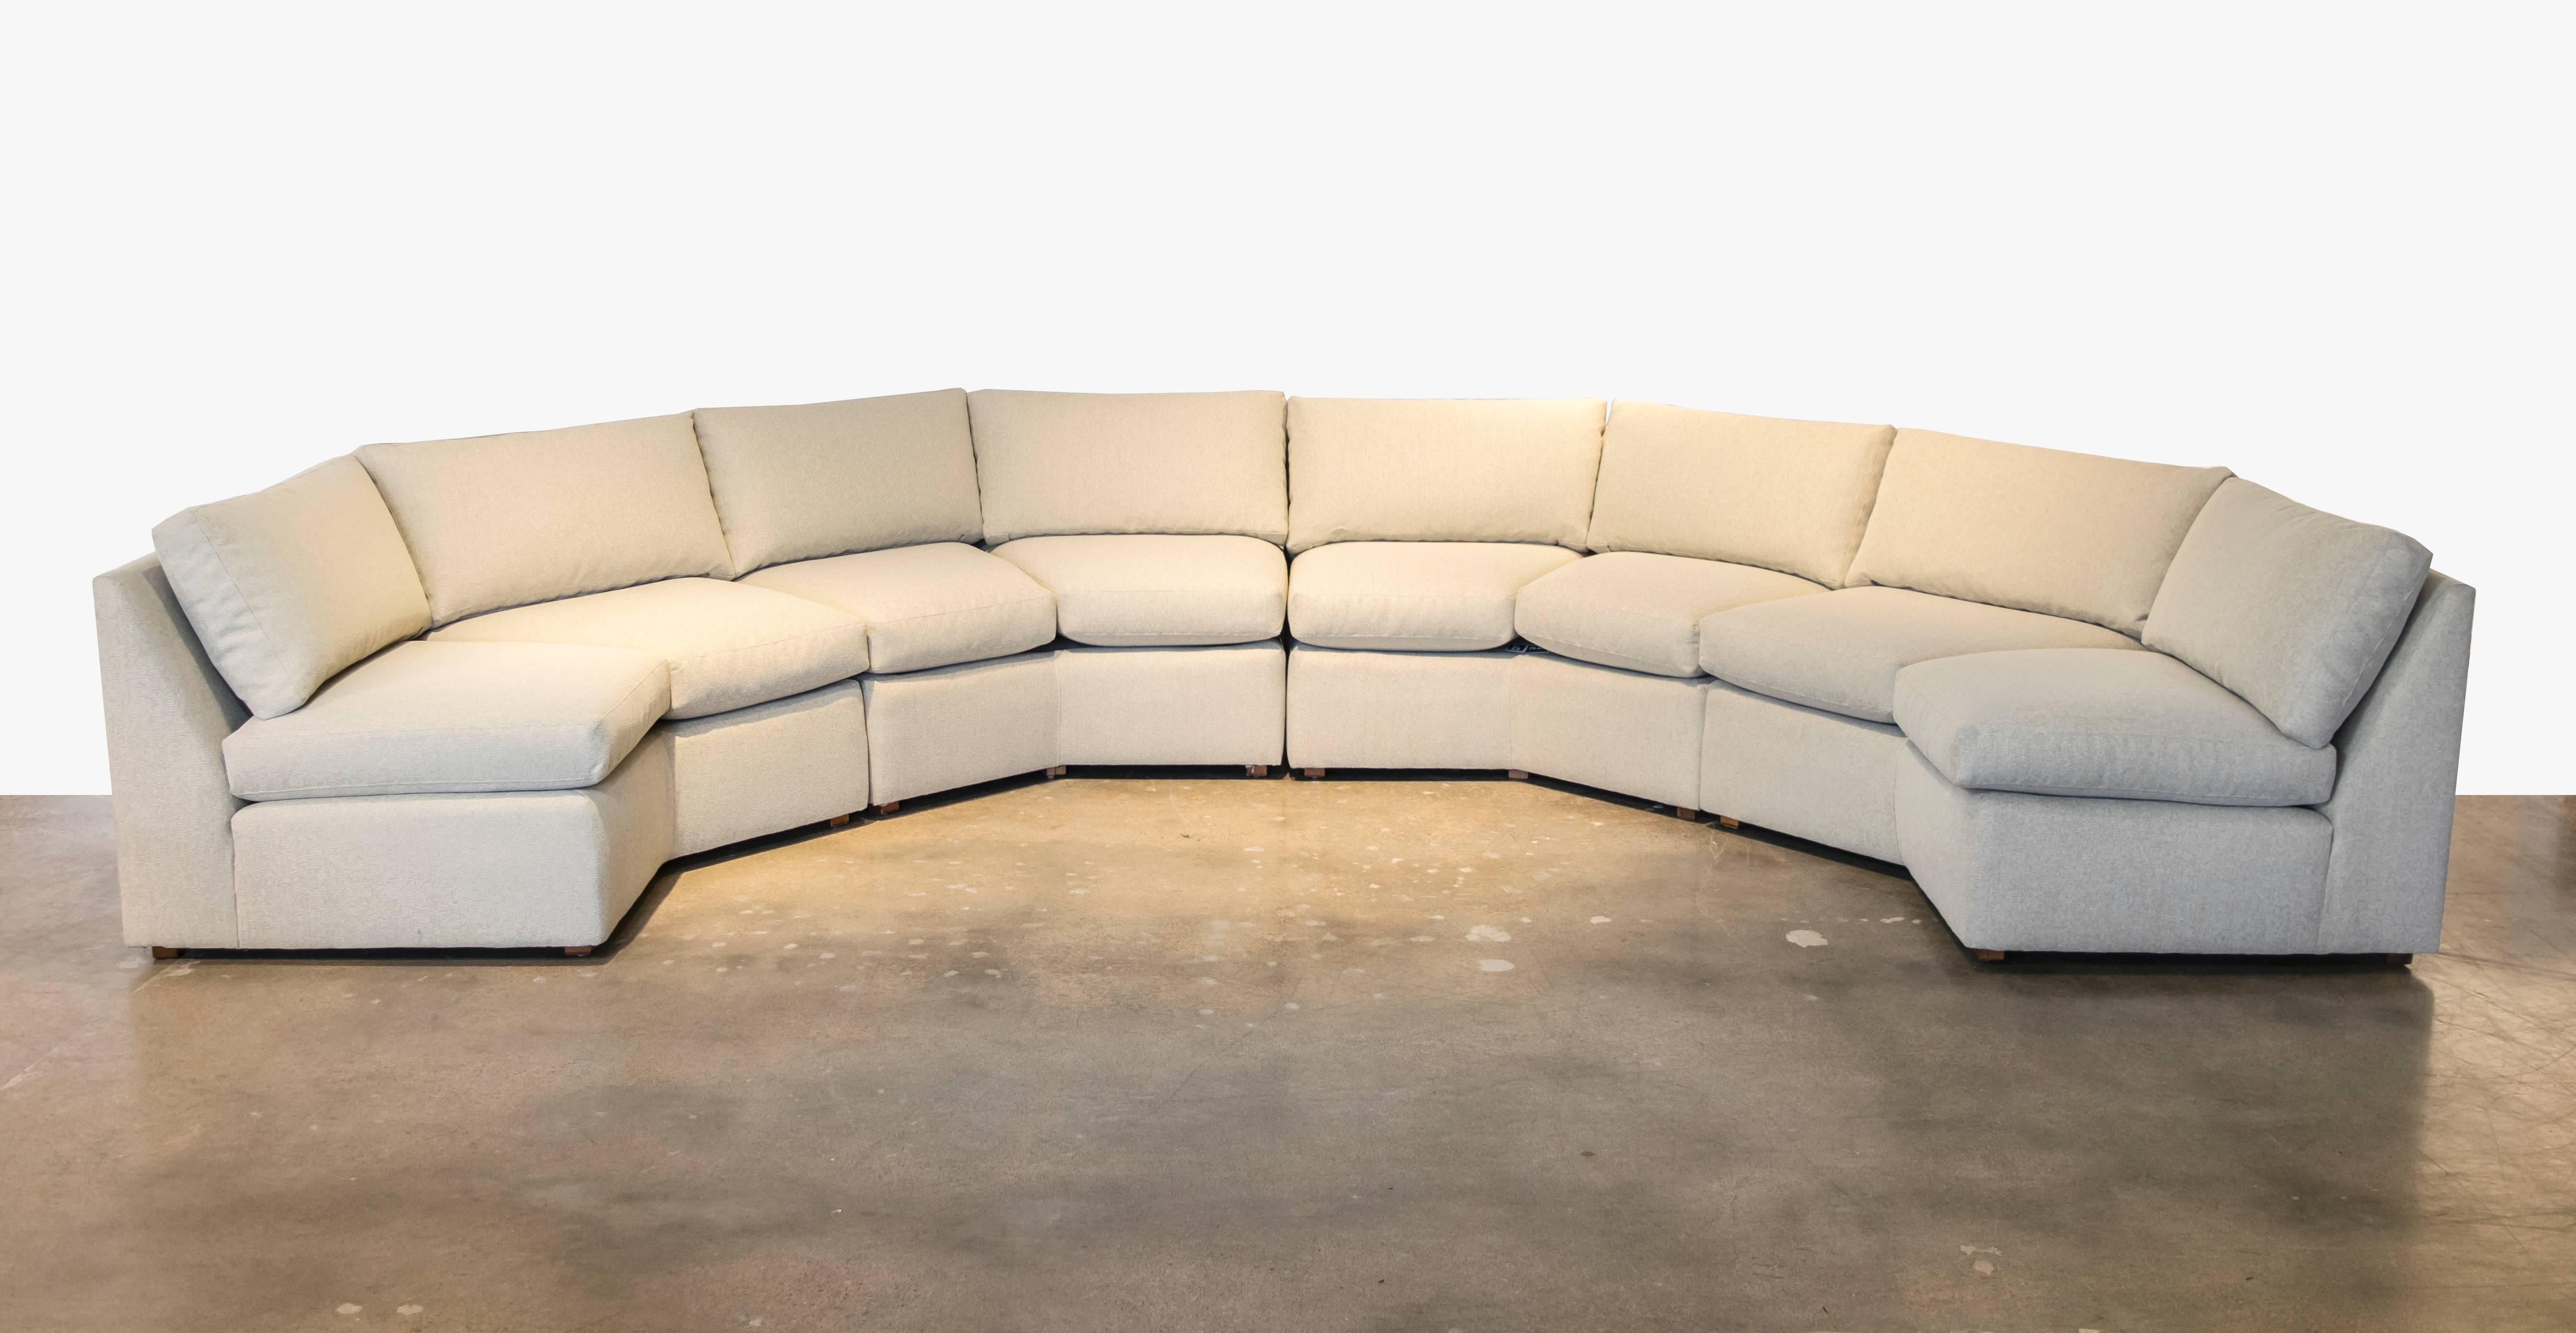 Here's a conversation pit sofa you've been waiting for! Recently recovered in new Maharam creme indoor/outdoor fabric. Can be configured in one continuous serpentine shape, as a semicircle or as two facing sofas.